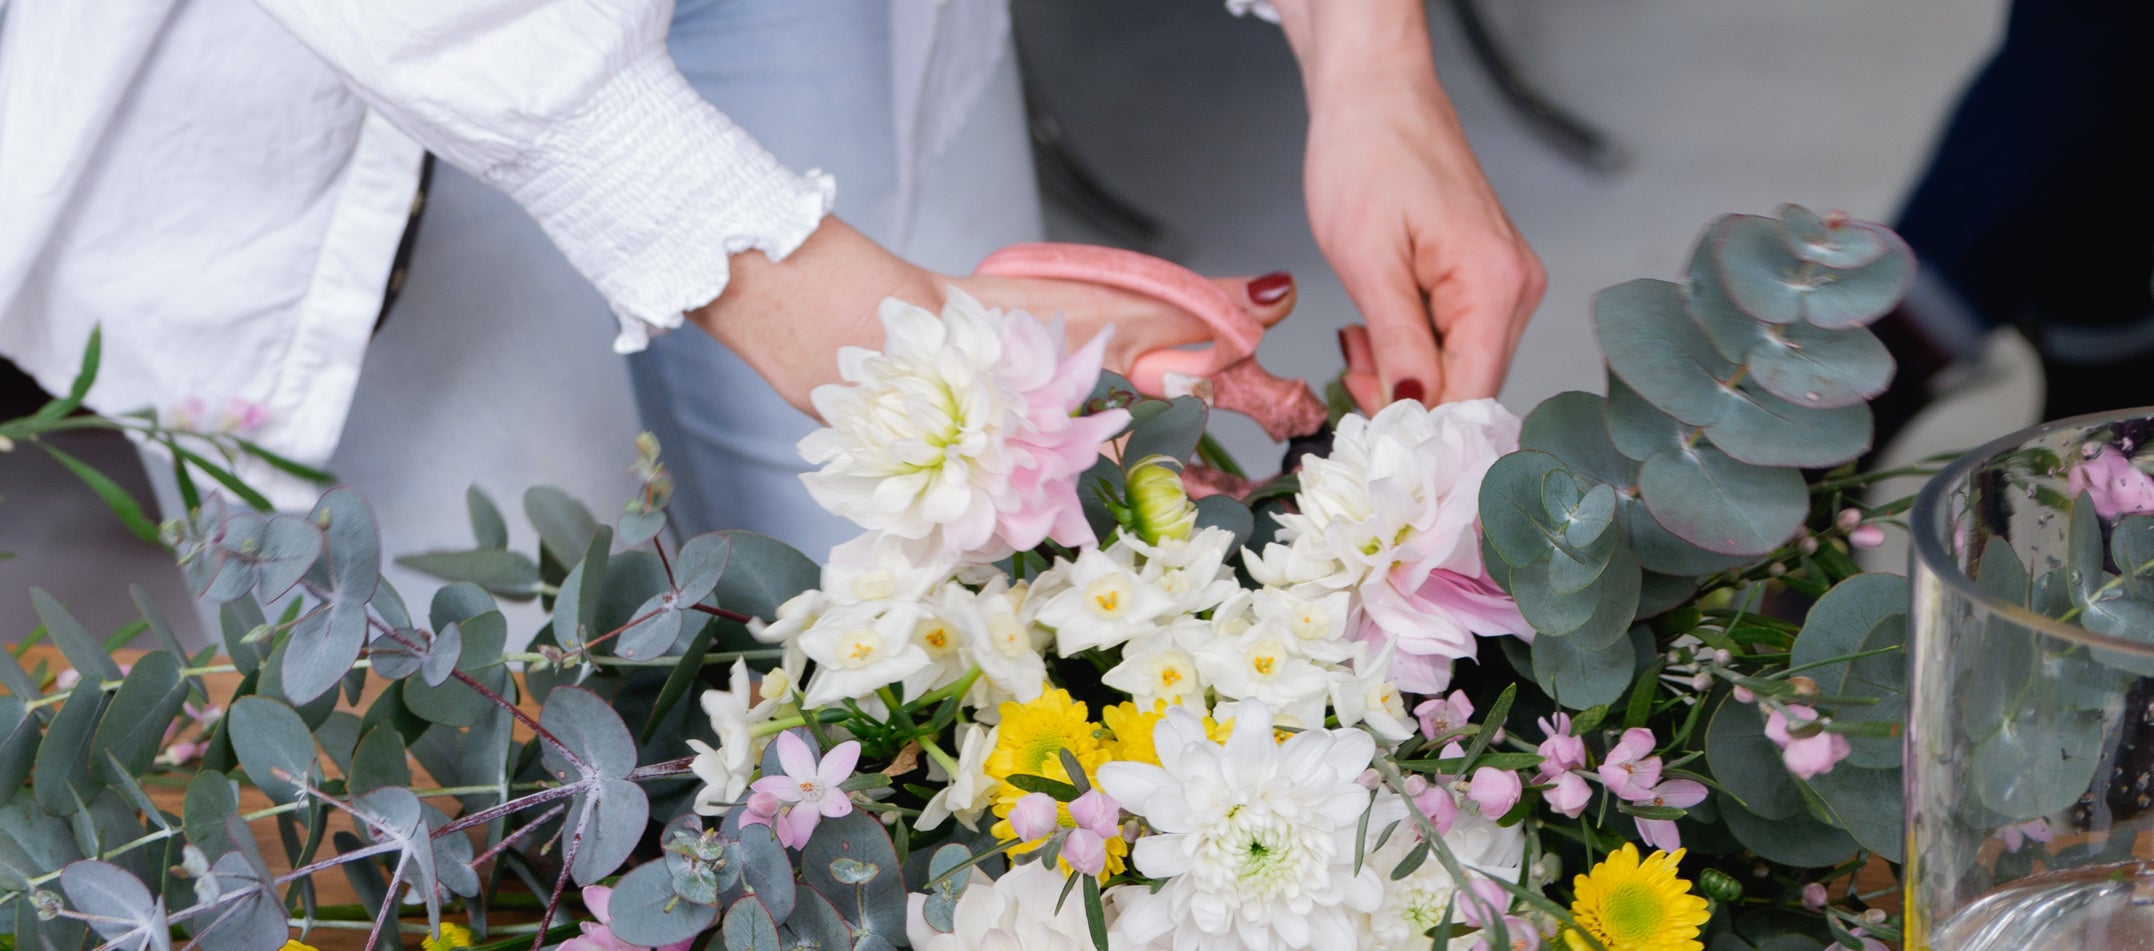 Flower Care: Florada's Tips on How to Keep Your Petals Perky!